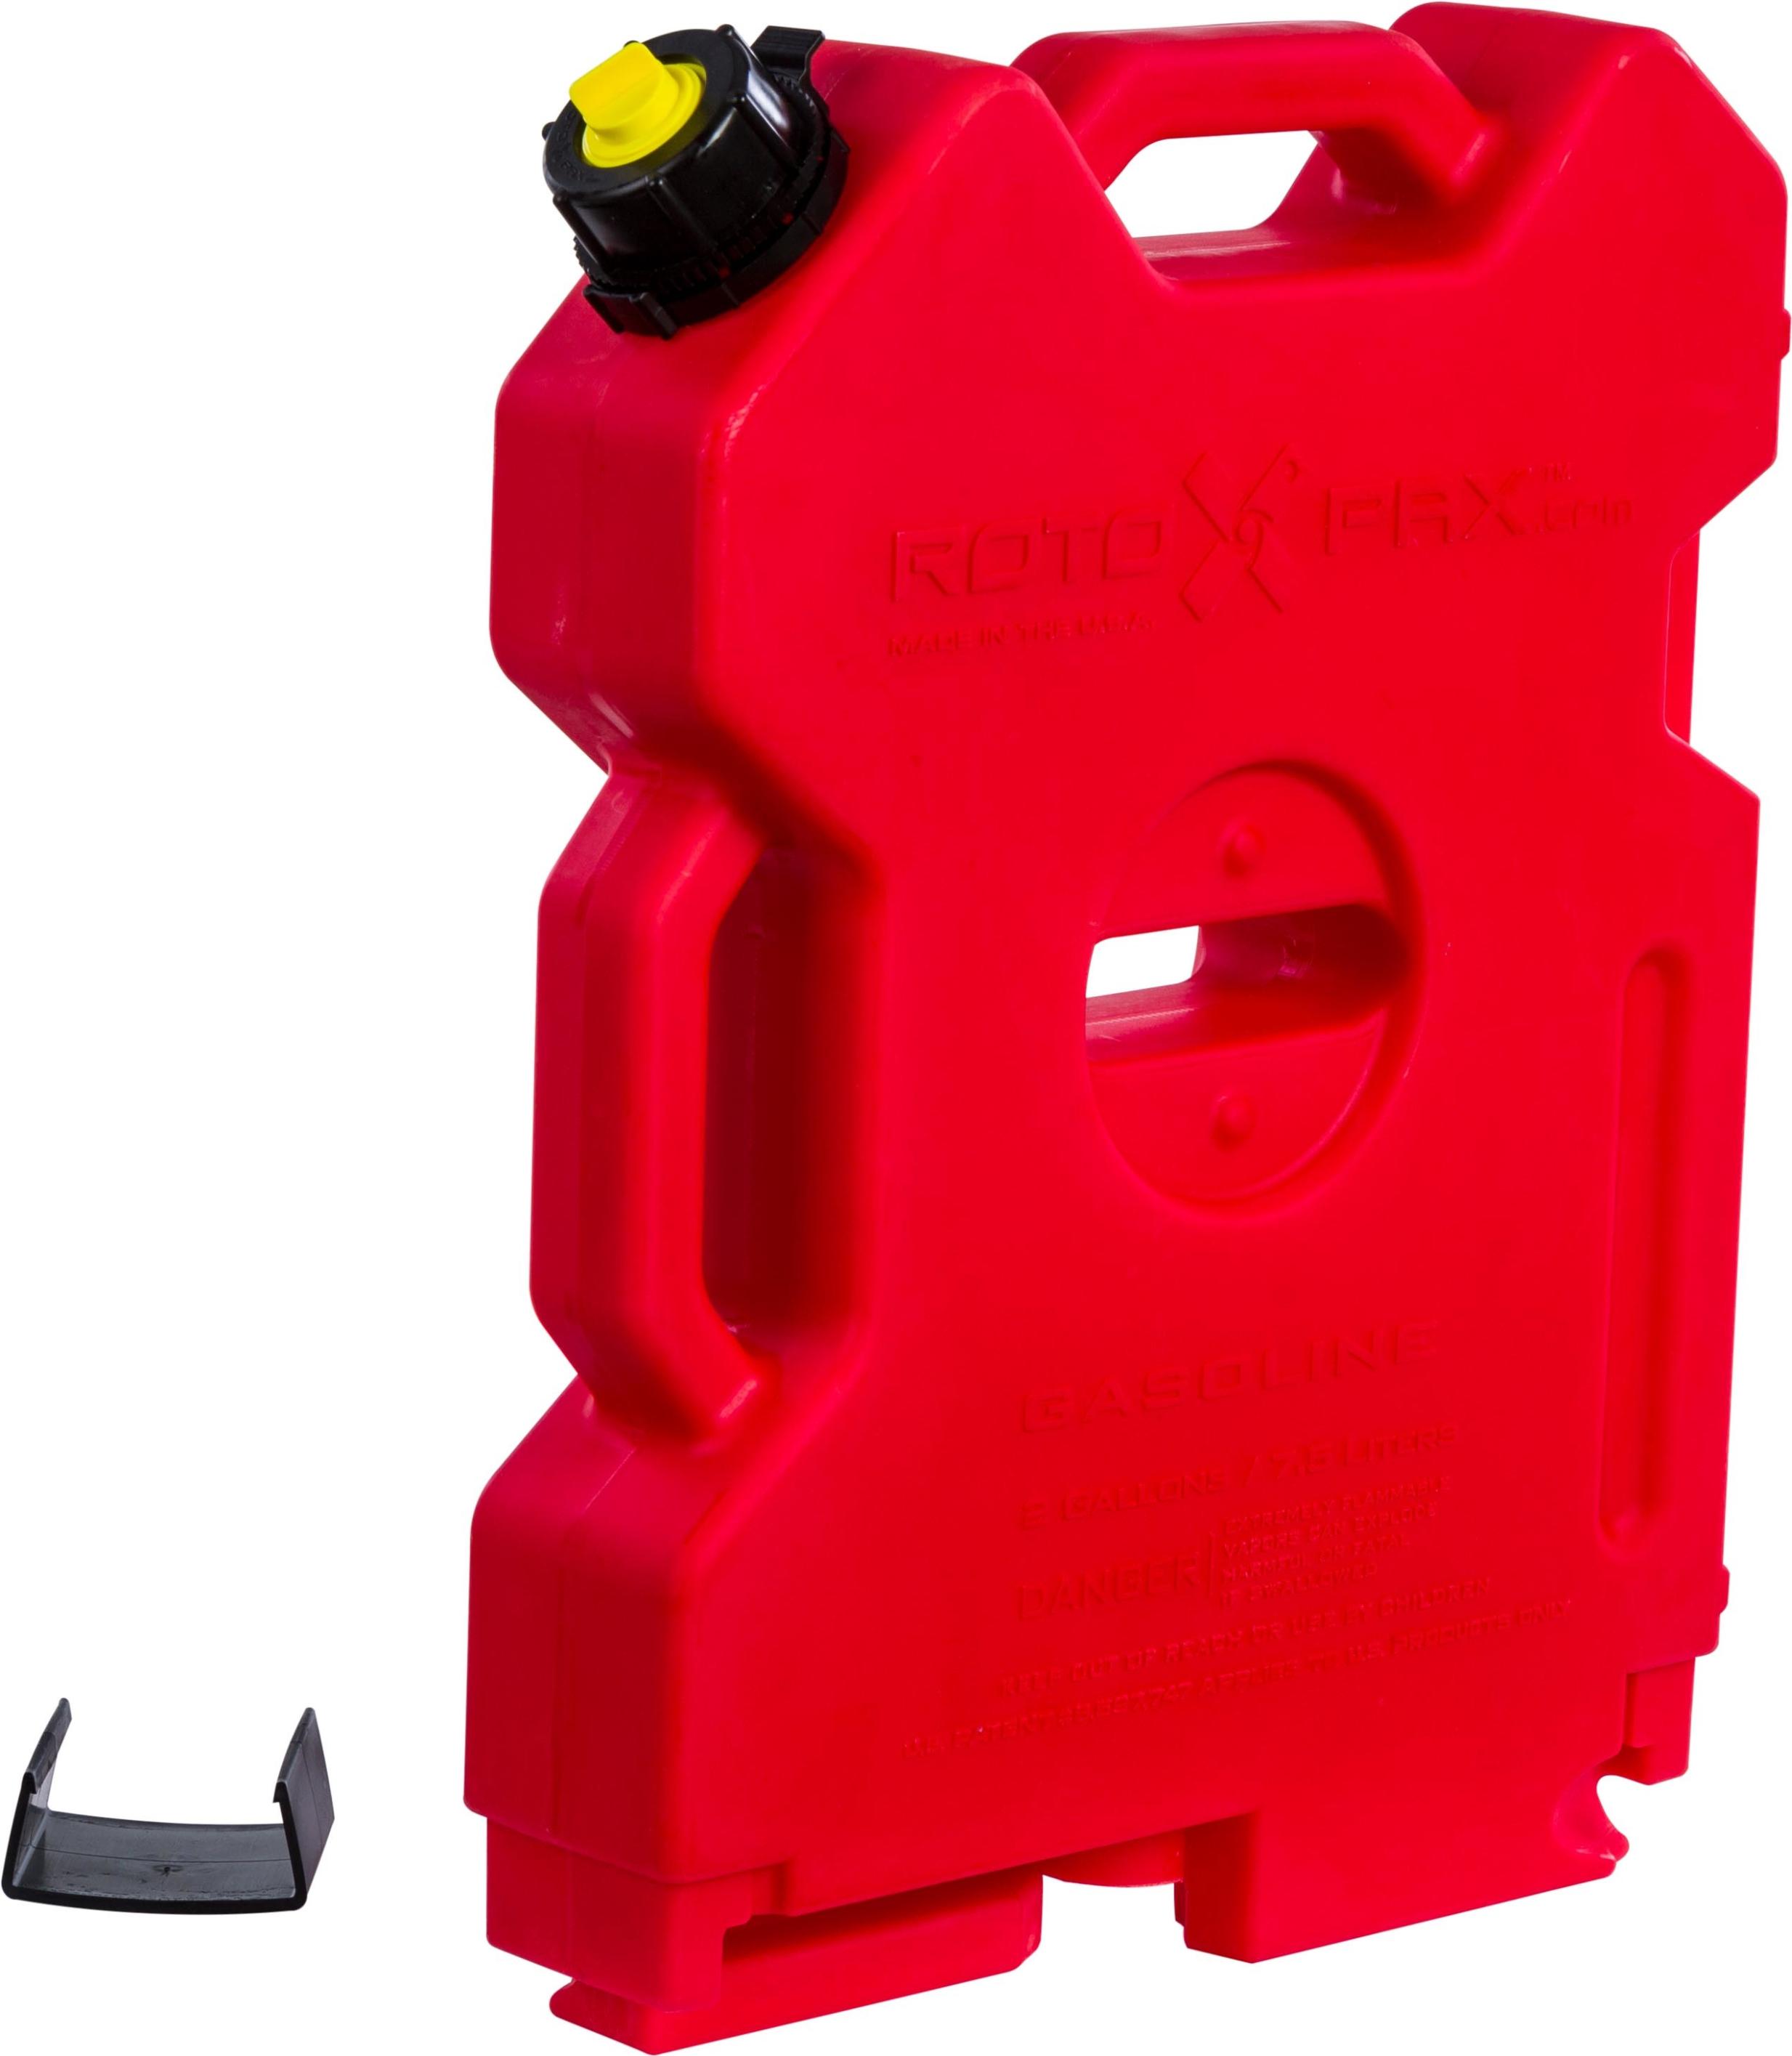 Rotopax - Fuel Container 2 Gal Carb - RX-2G